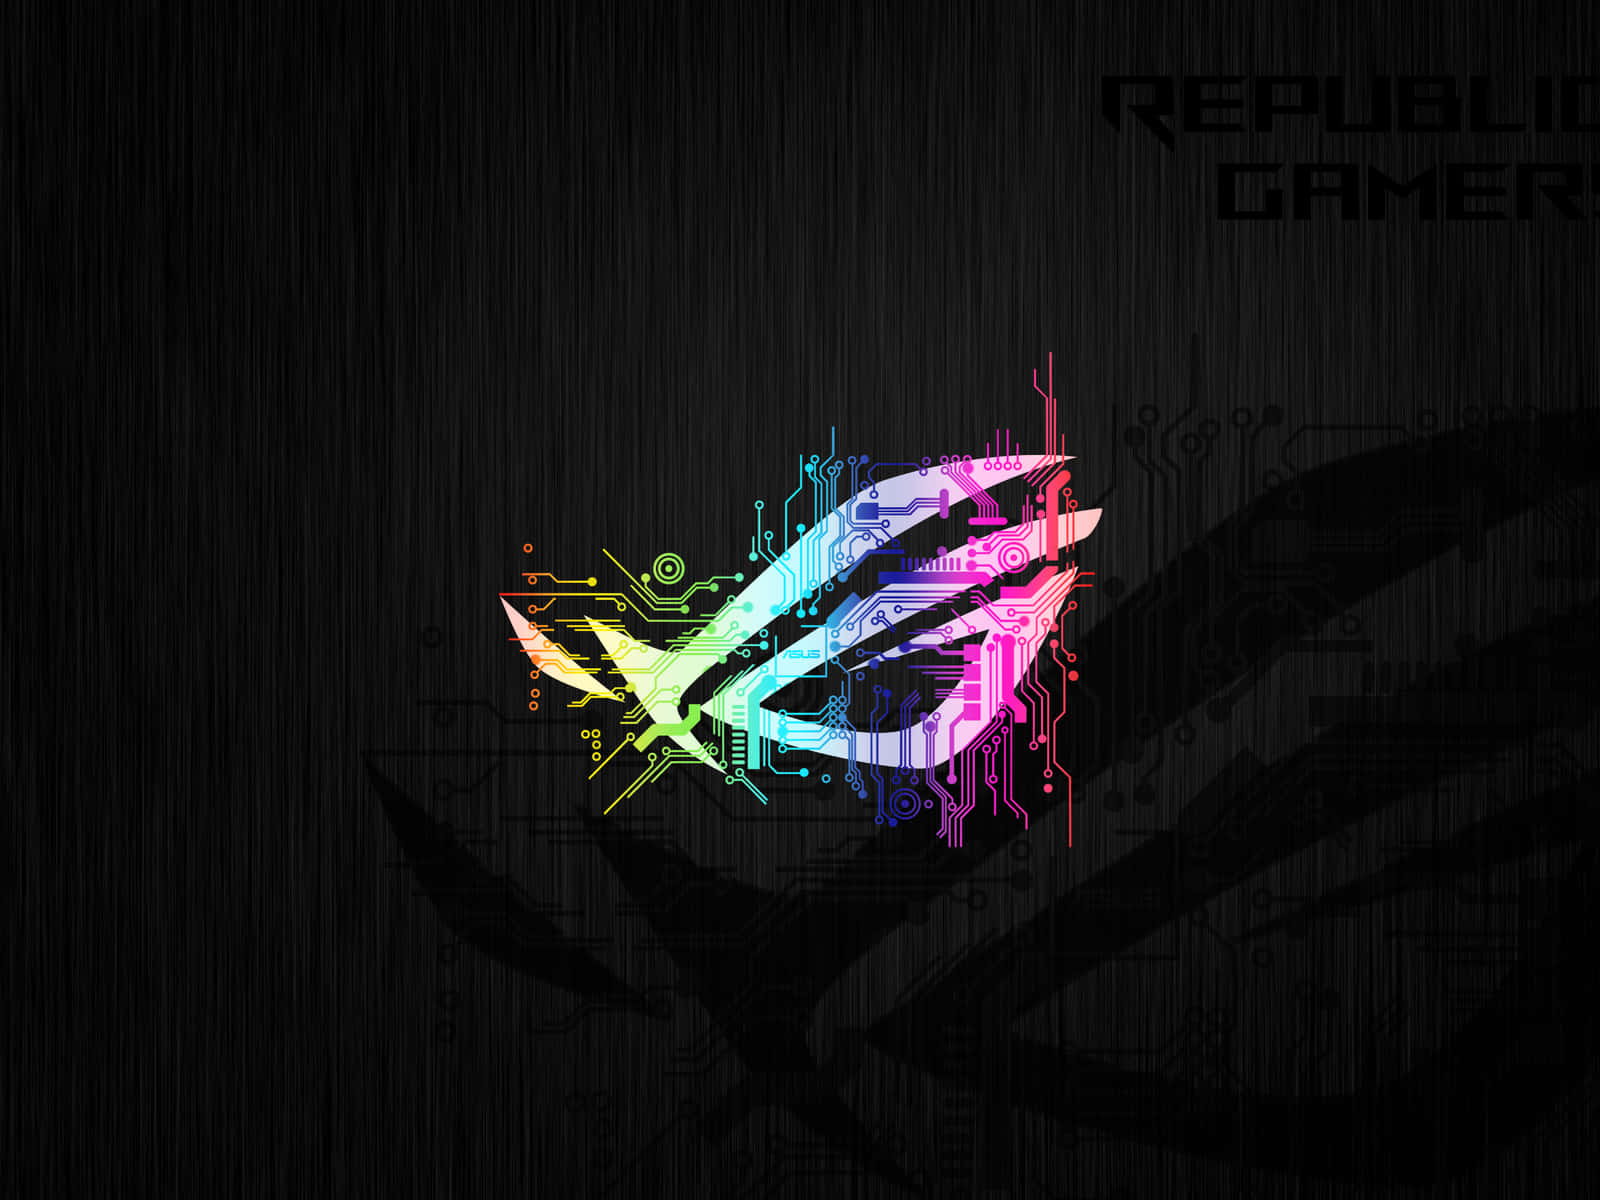 Step Up Your Game with Abstract Gaming Wallpaper